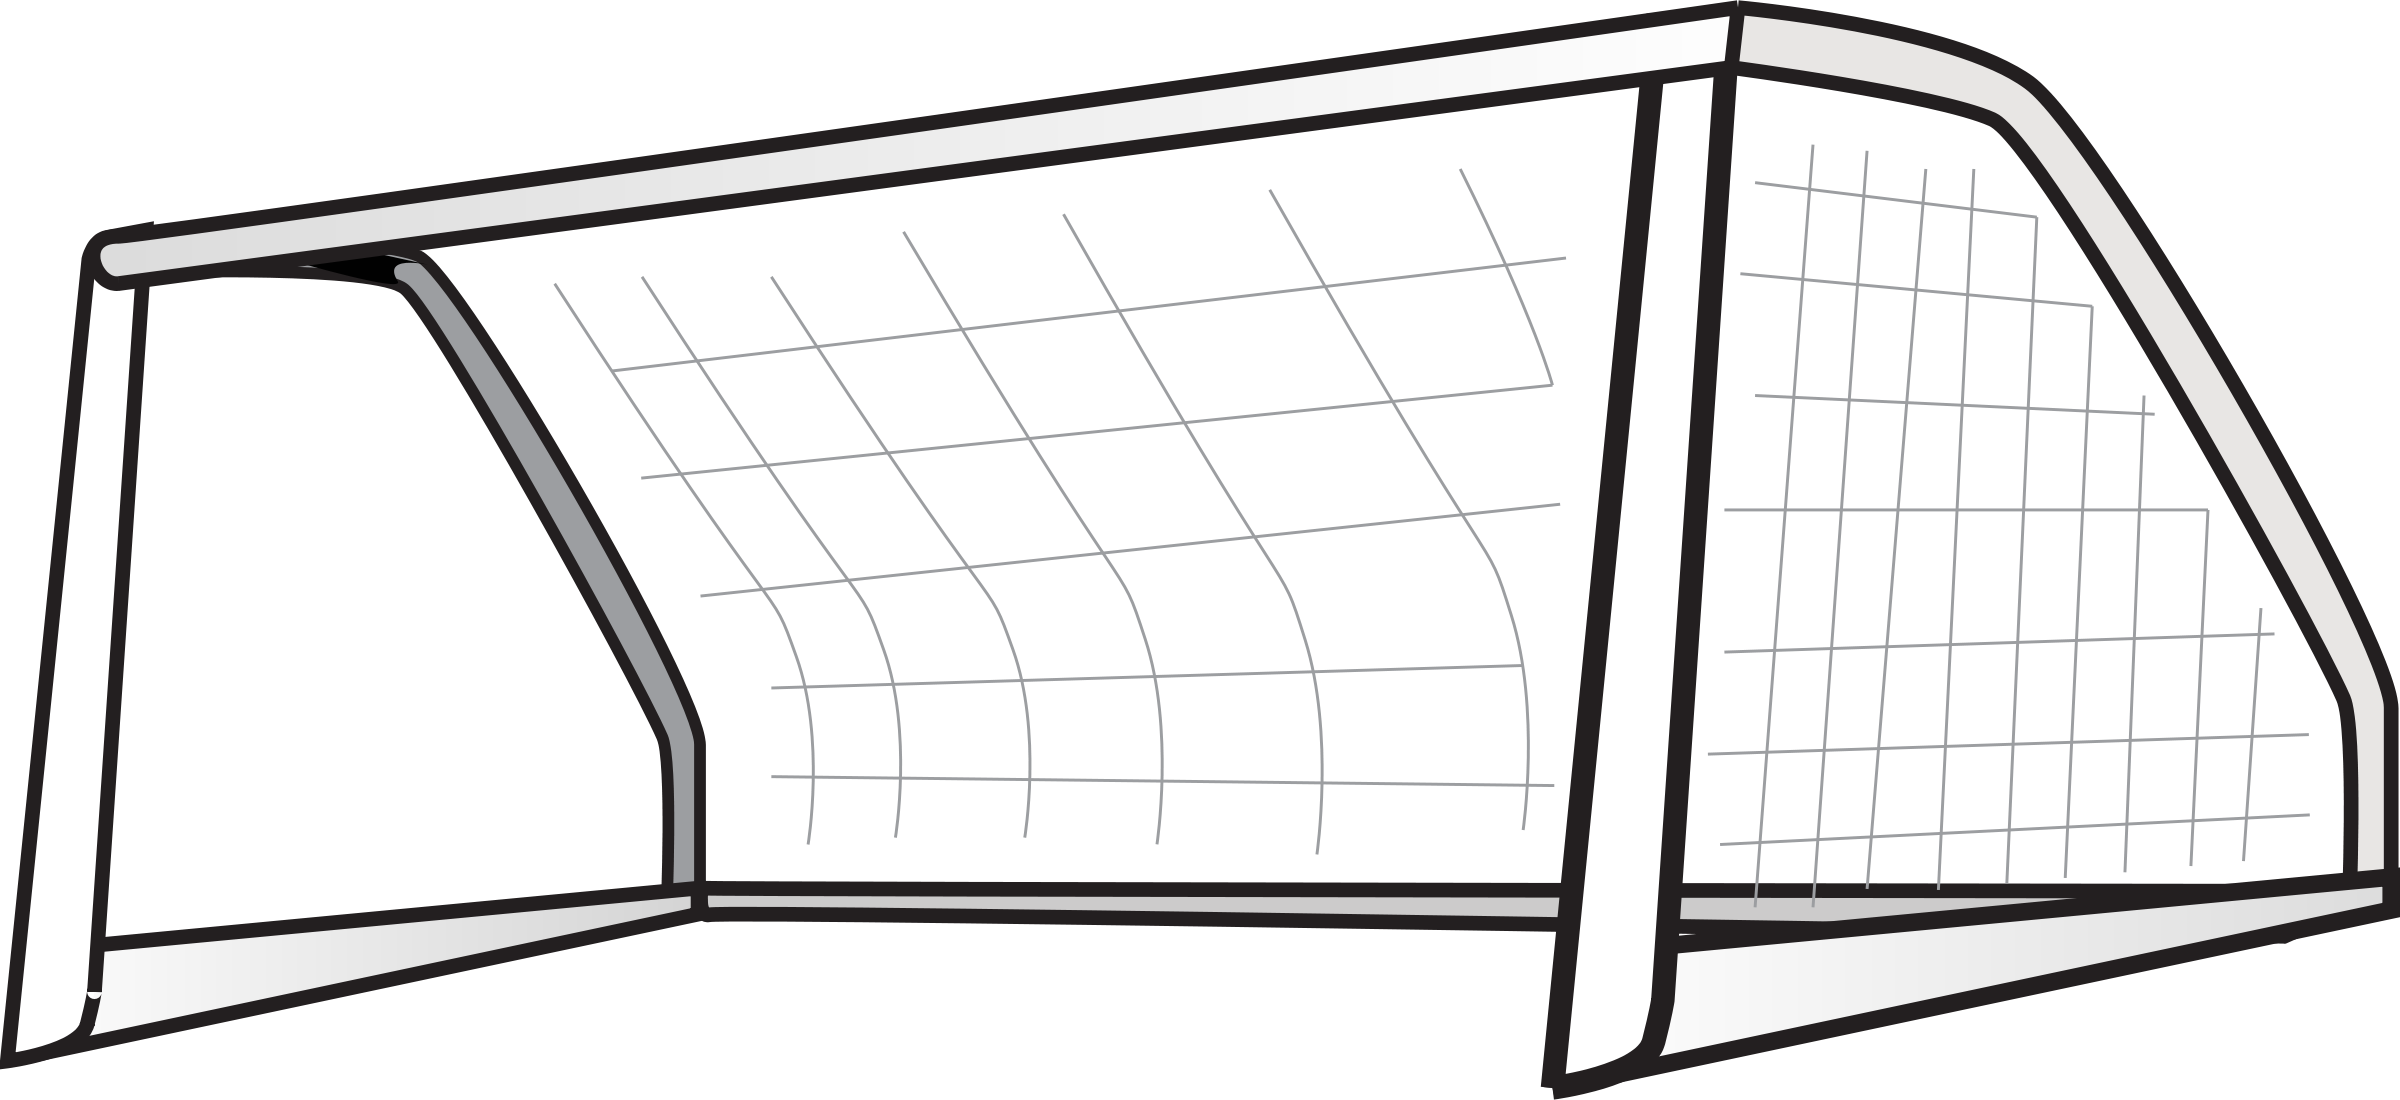 Clipart Football Goal Post   Clipart Panda   Free Clipart Images